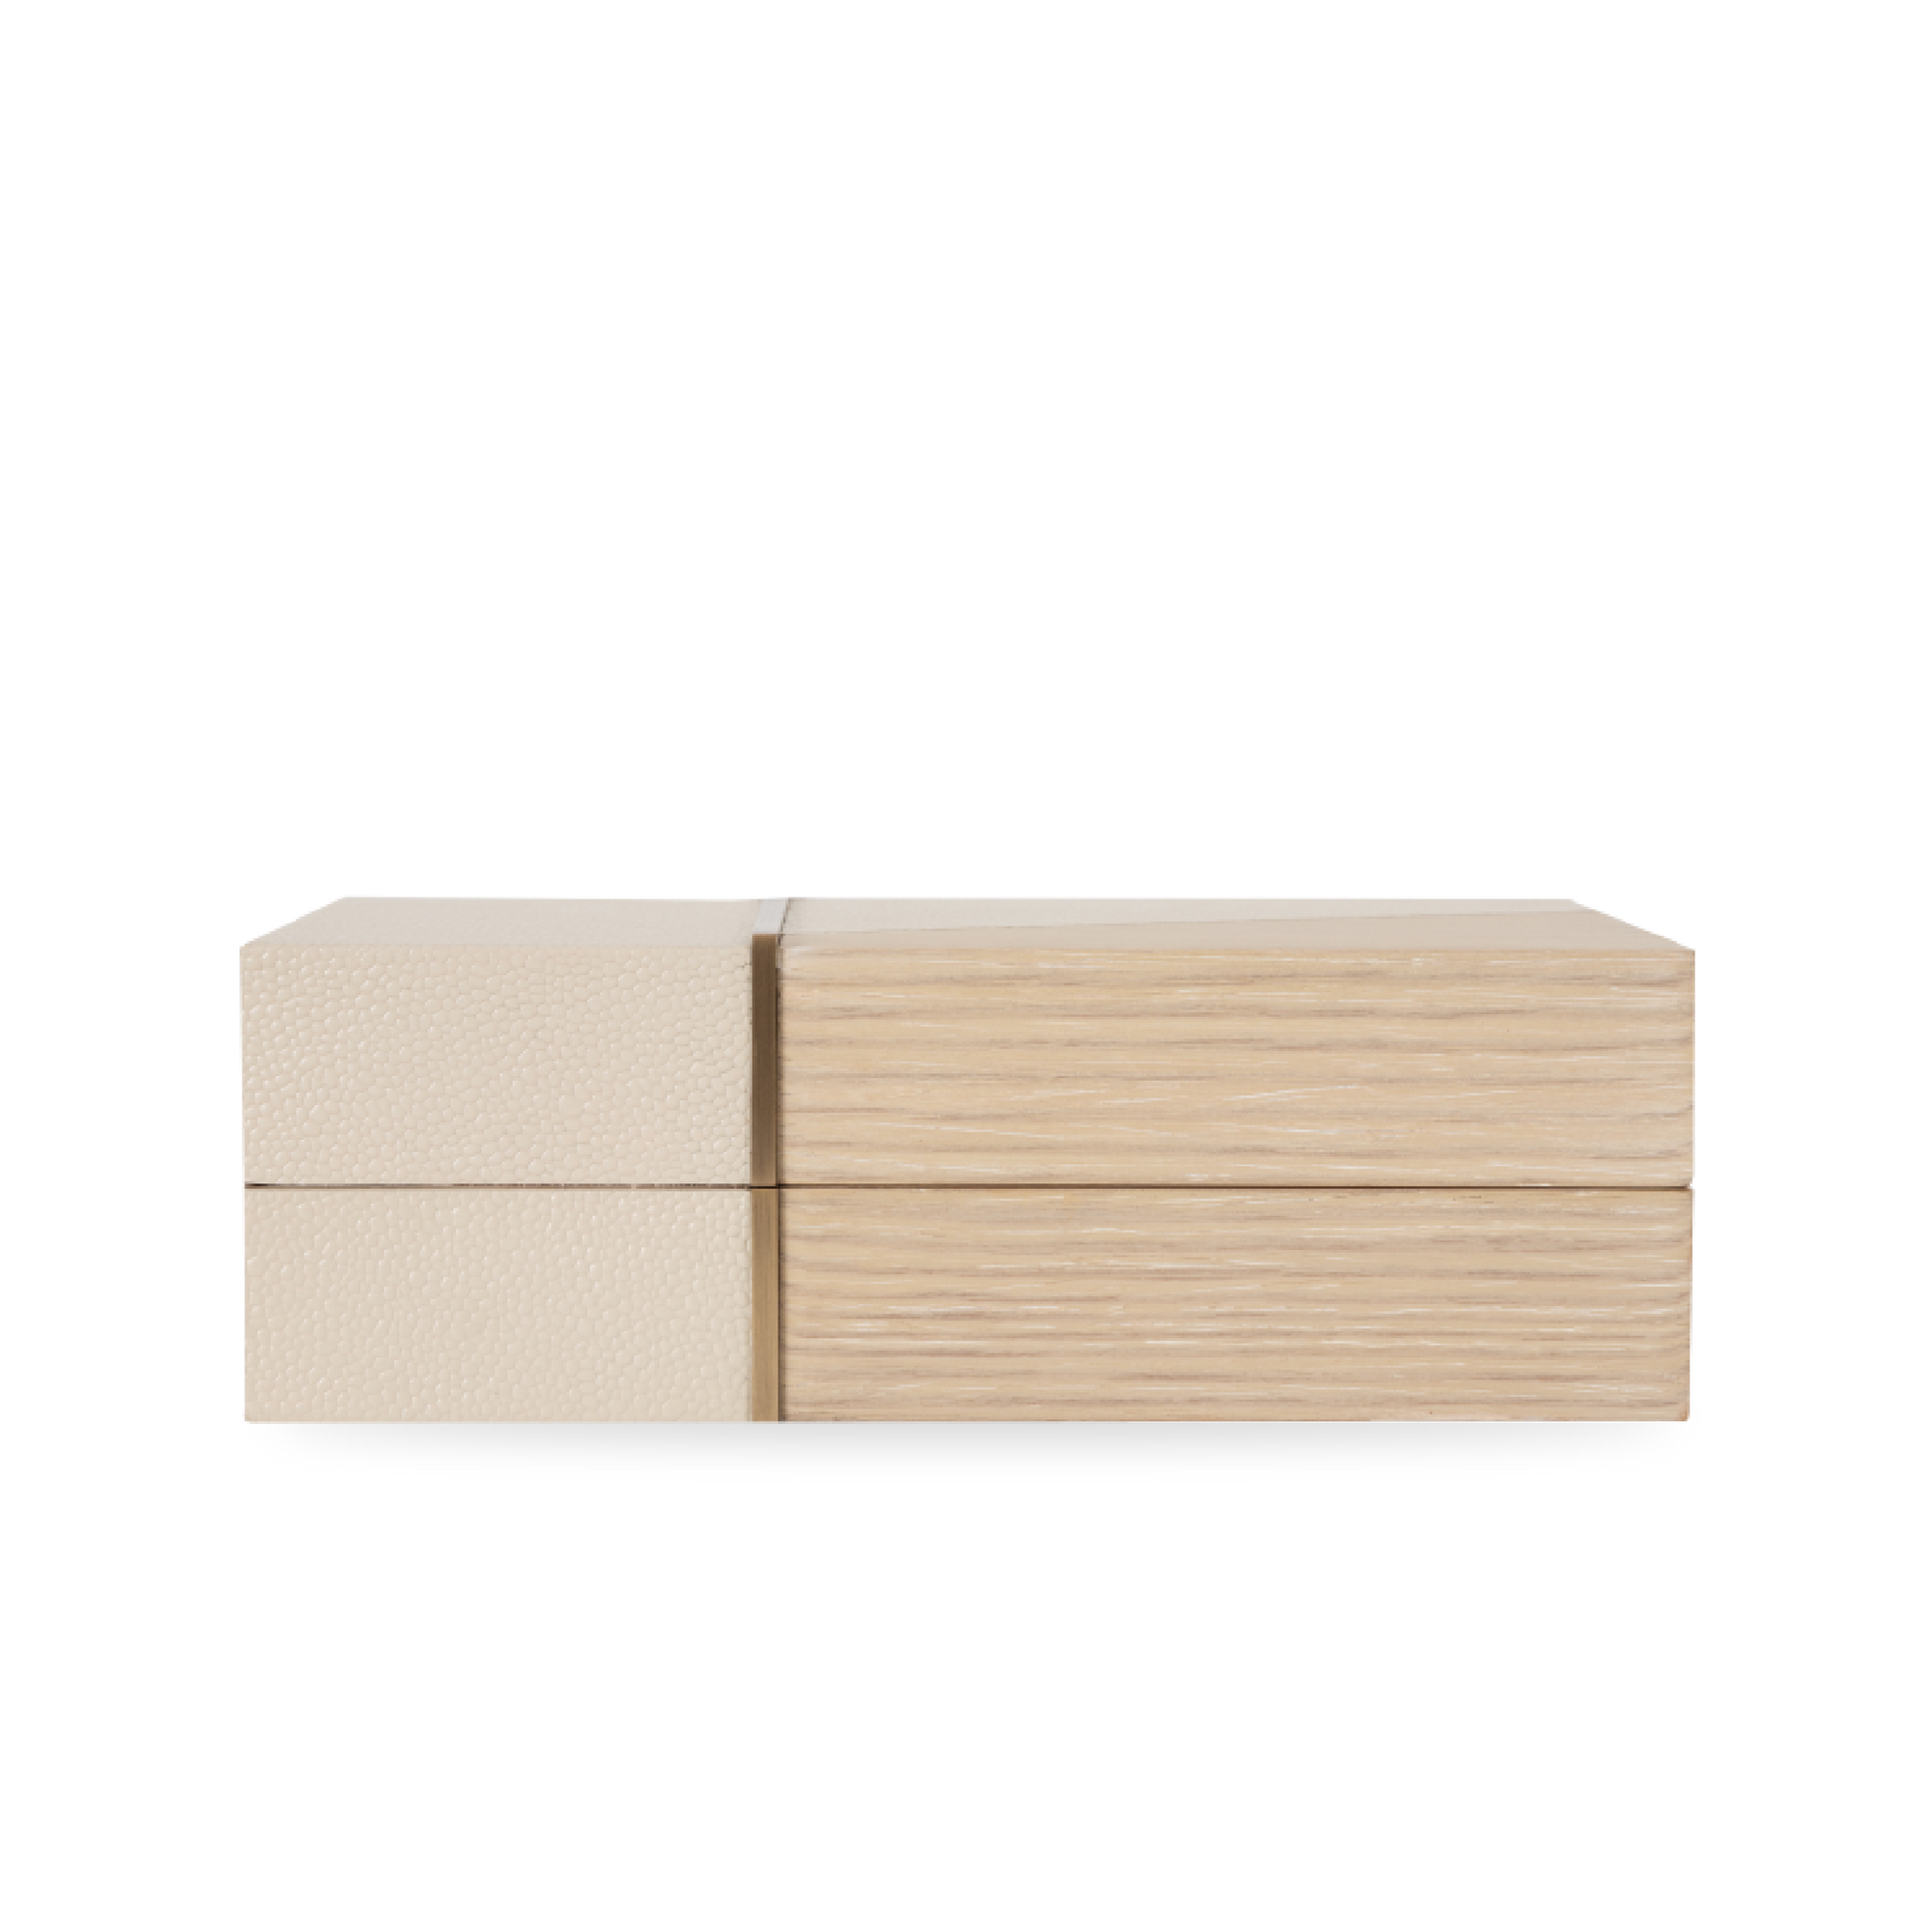 In a beautiful union of blonde oak wood, cream embossed leather and rich antique brass, the Spoletto Oak Box is a characterised as a neo-deco box that will effortless stands out.